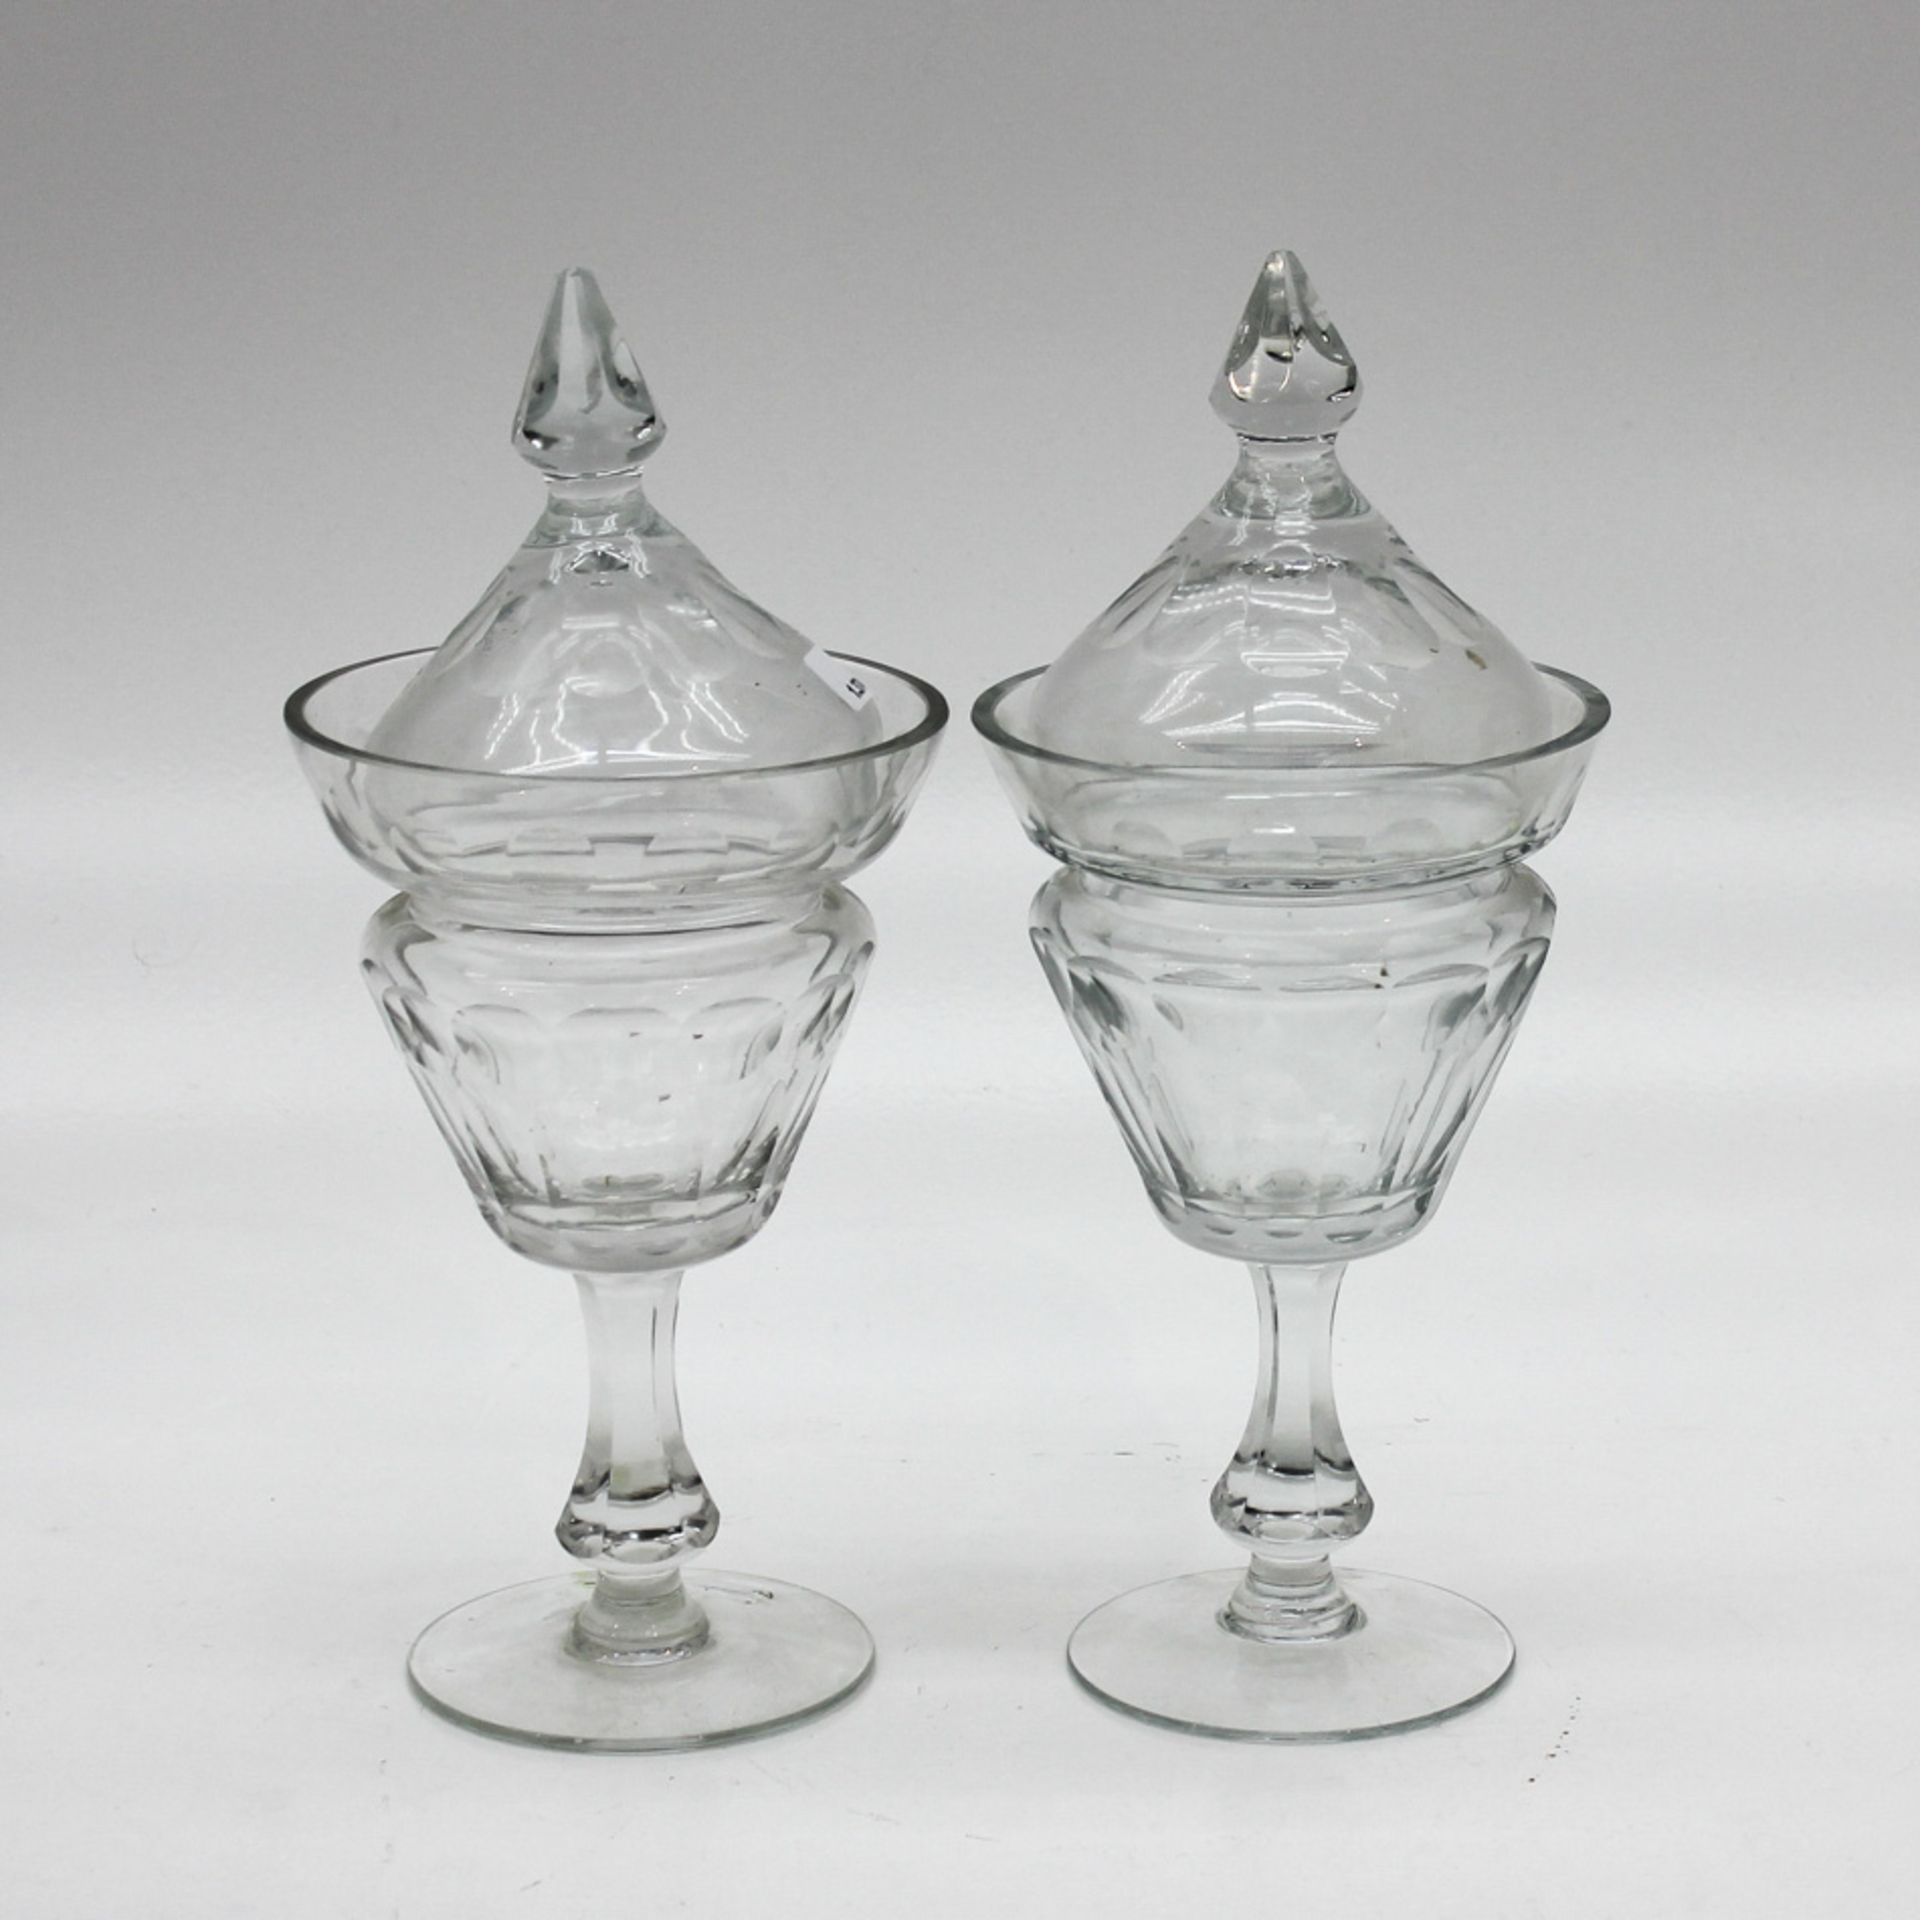 Lot of 2 Crystal Jars with Lids 33 cm tall.